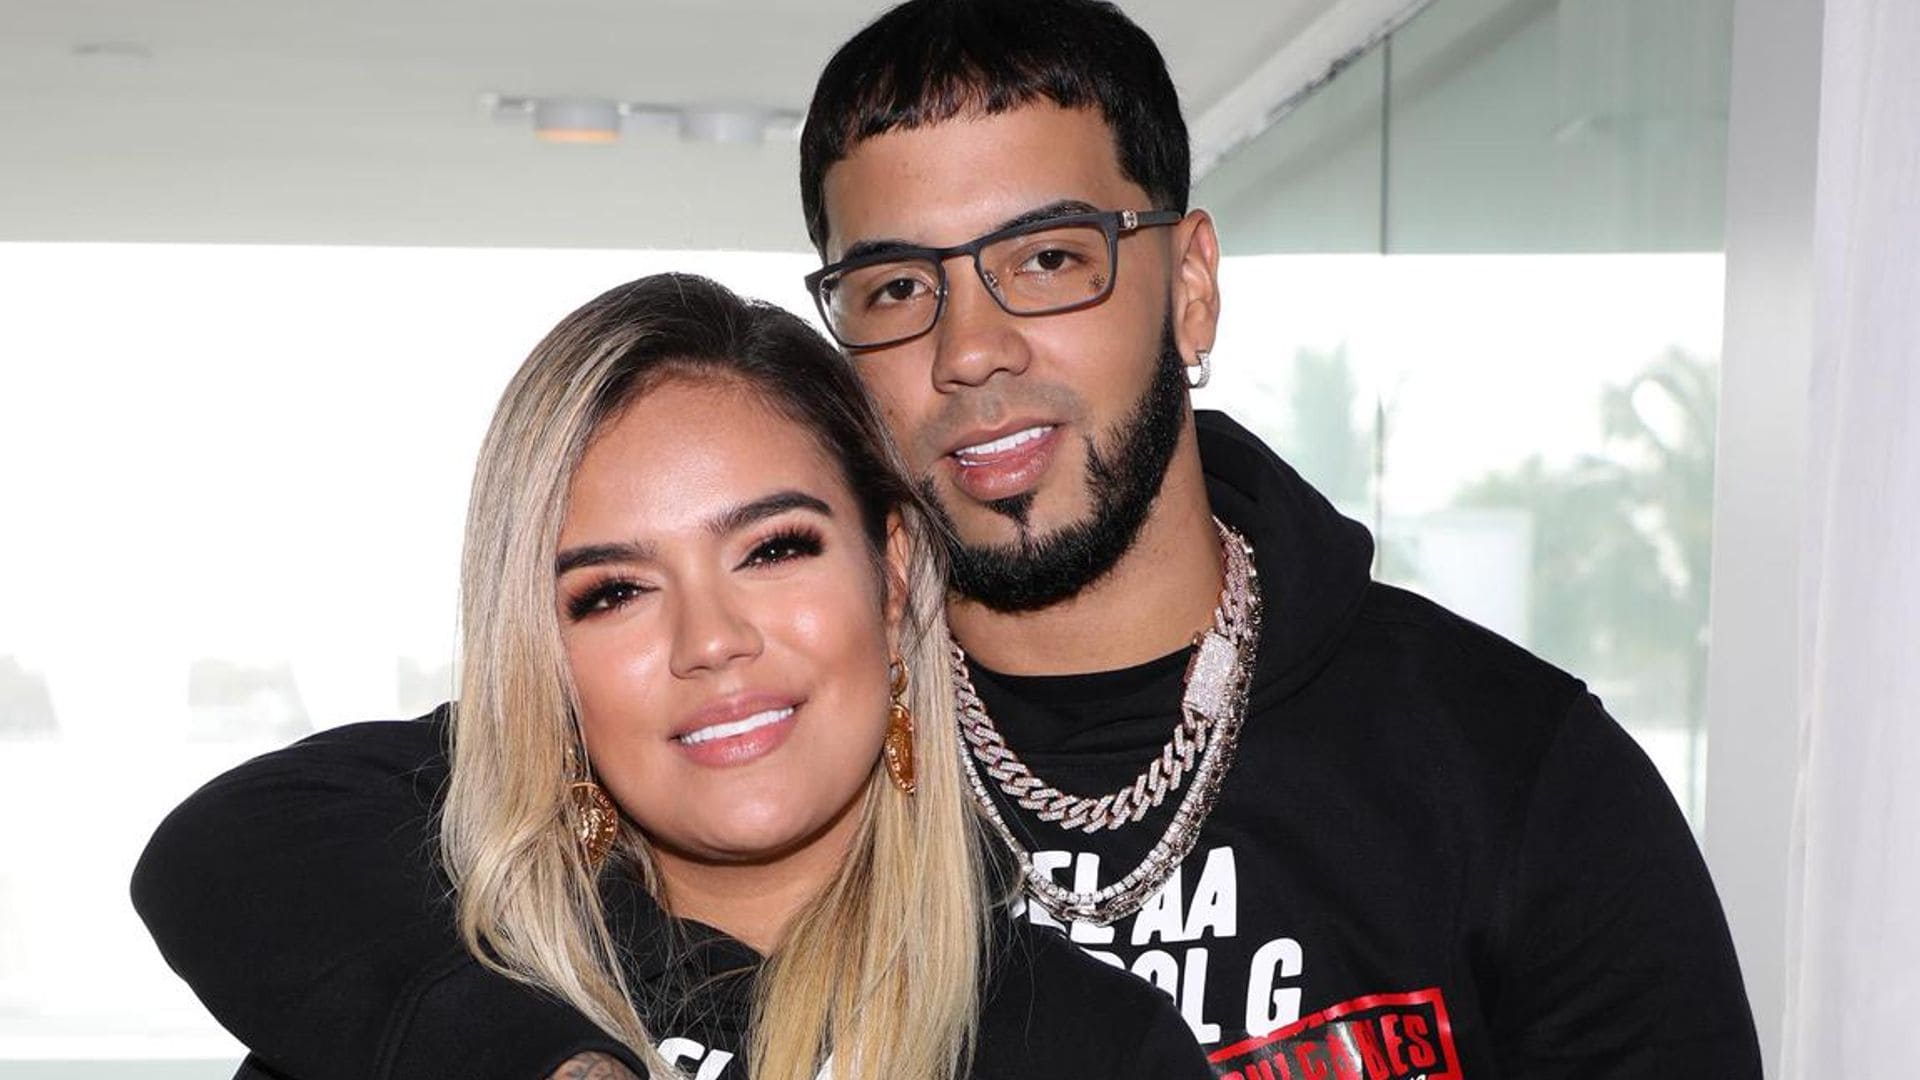 Karol G and Anuel AA have date night in Miami